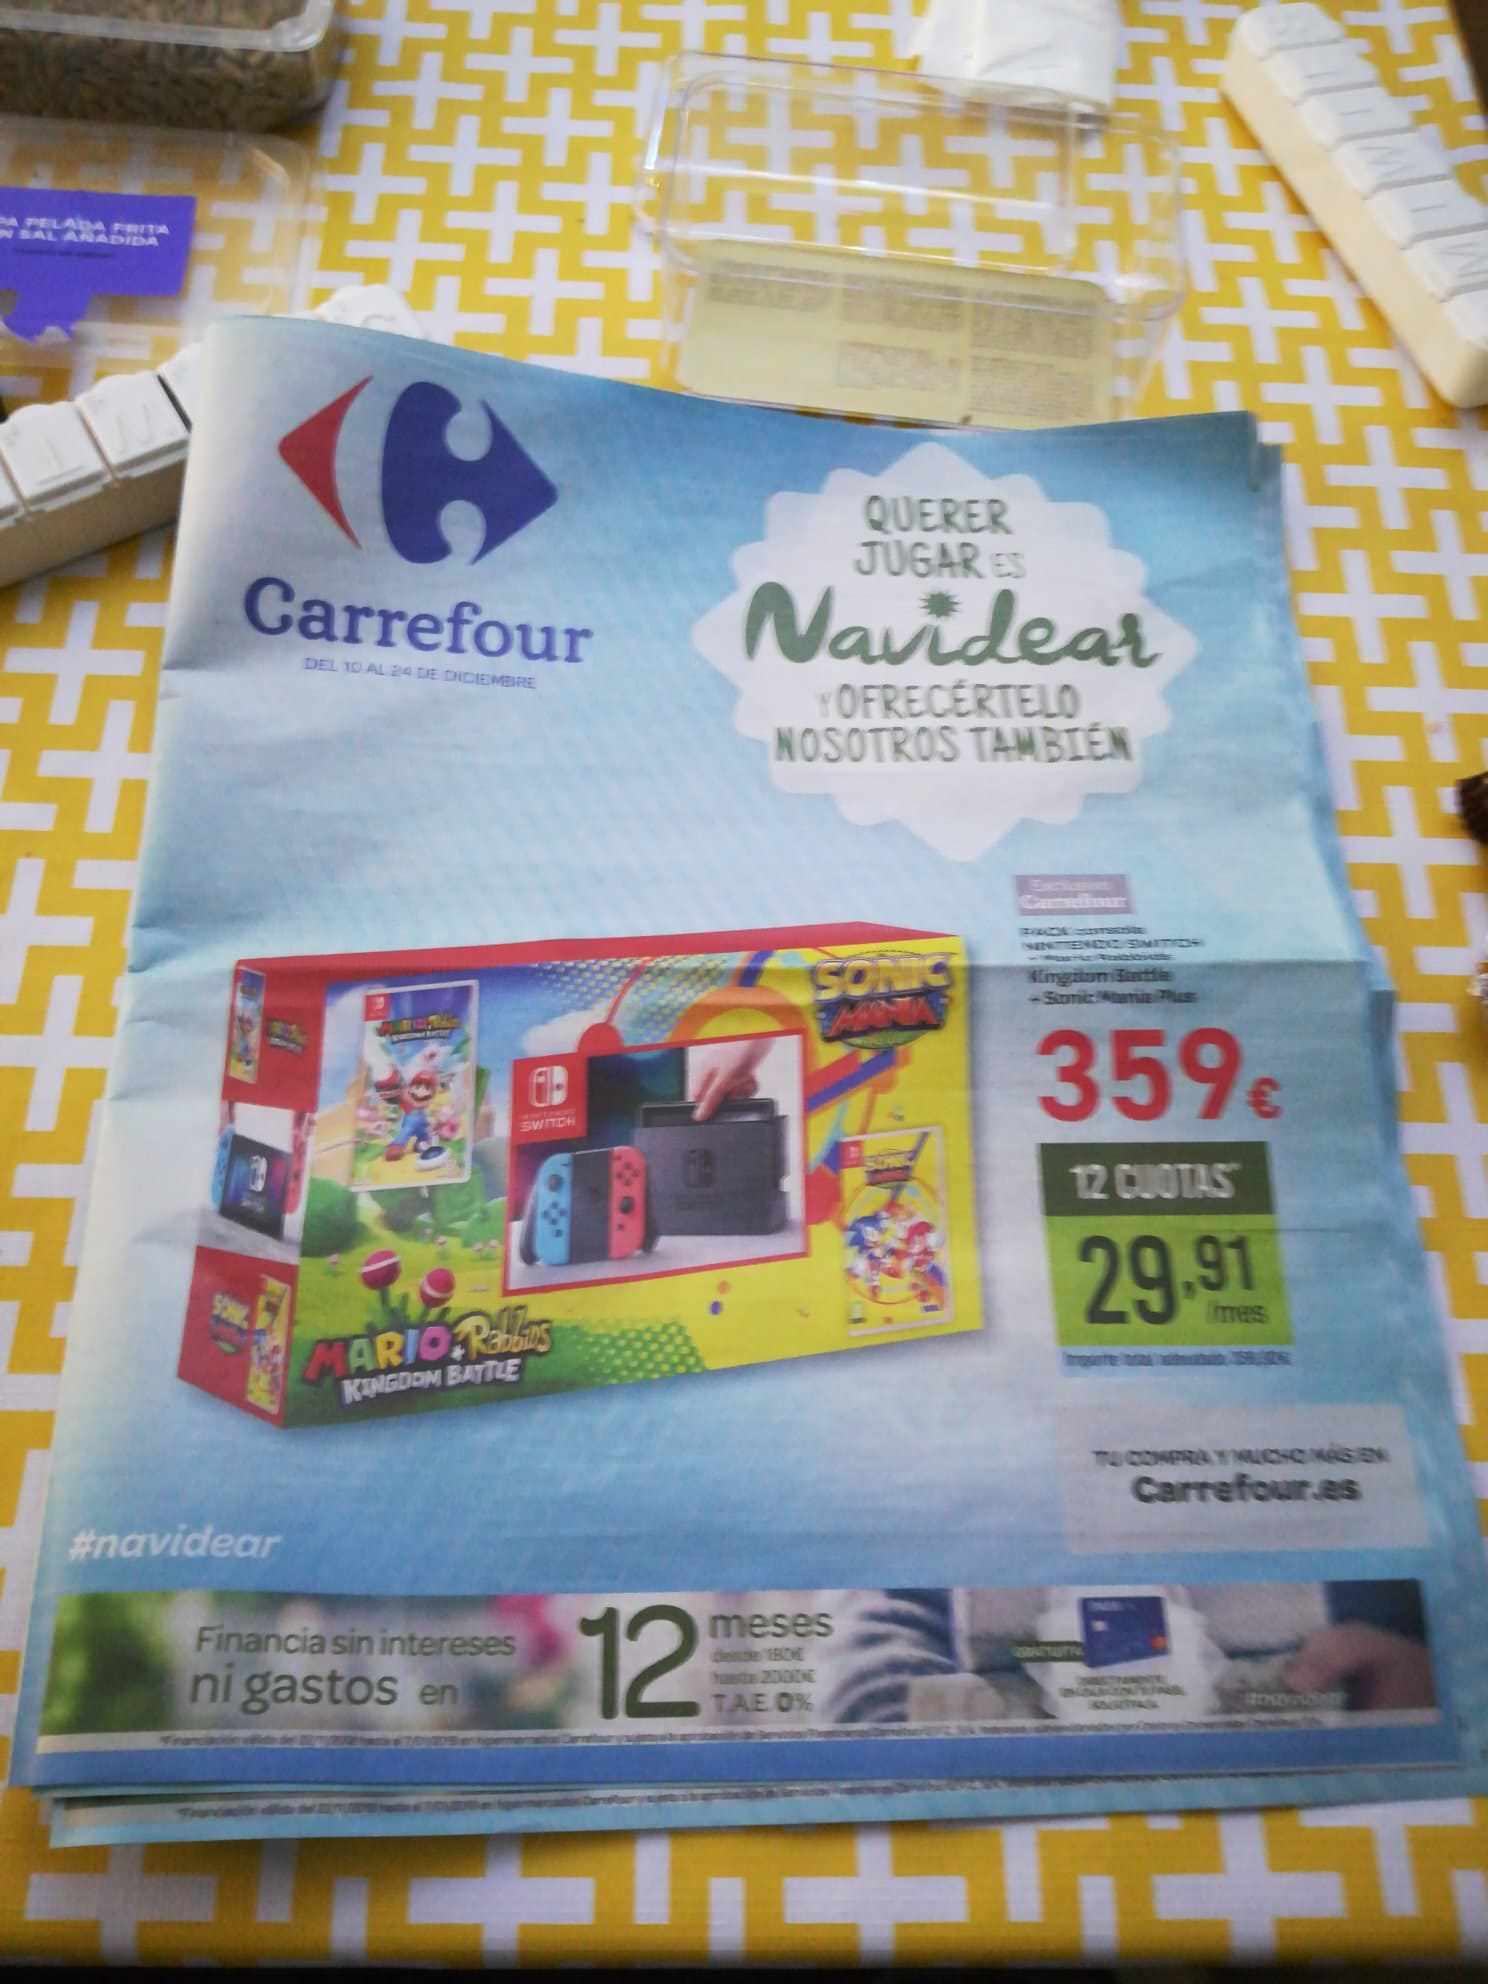 Nintendo Switch - Spanish retailer Carrefour lists special holiday